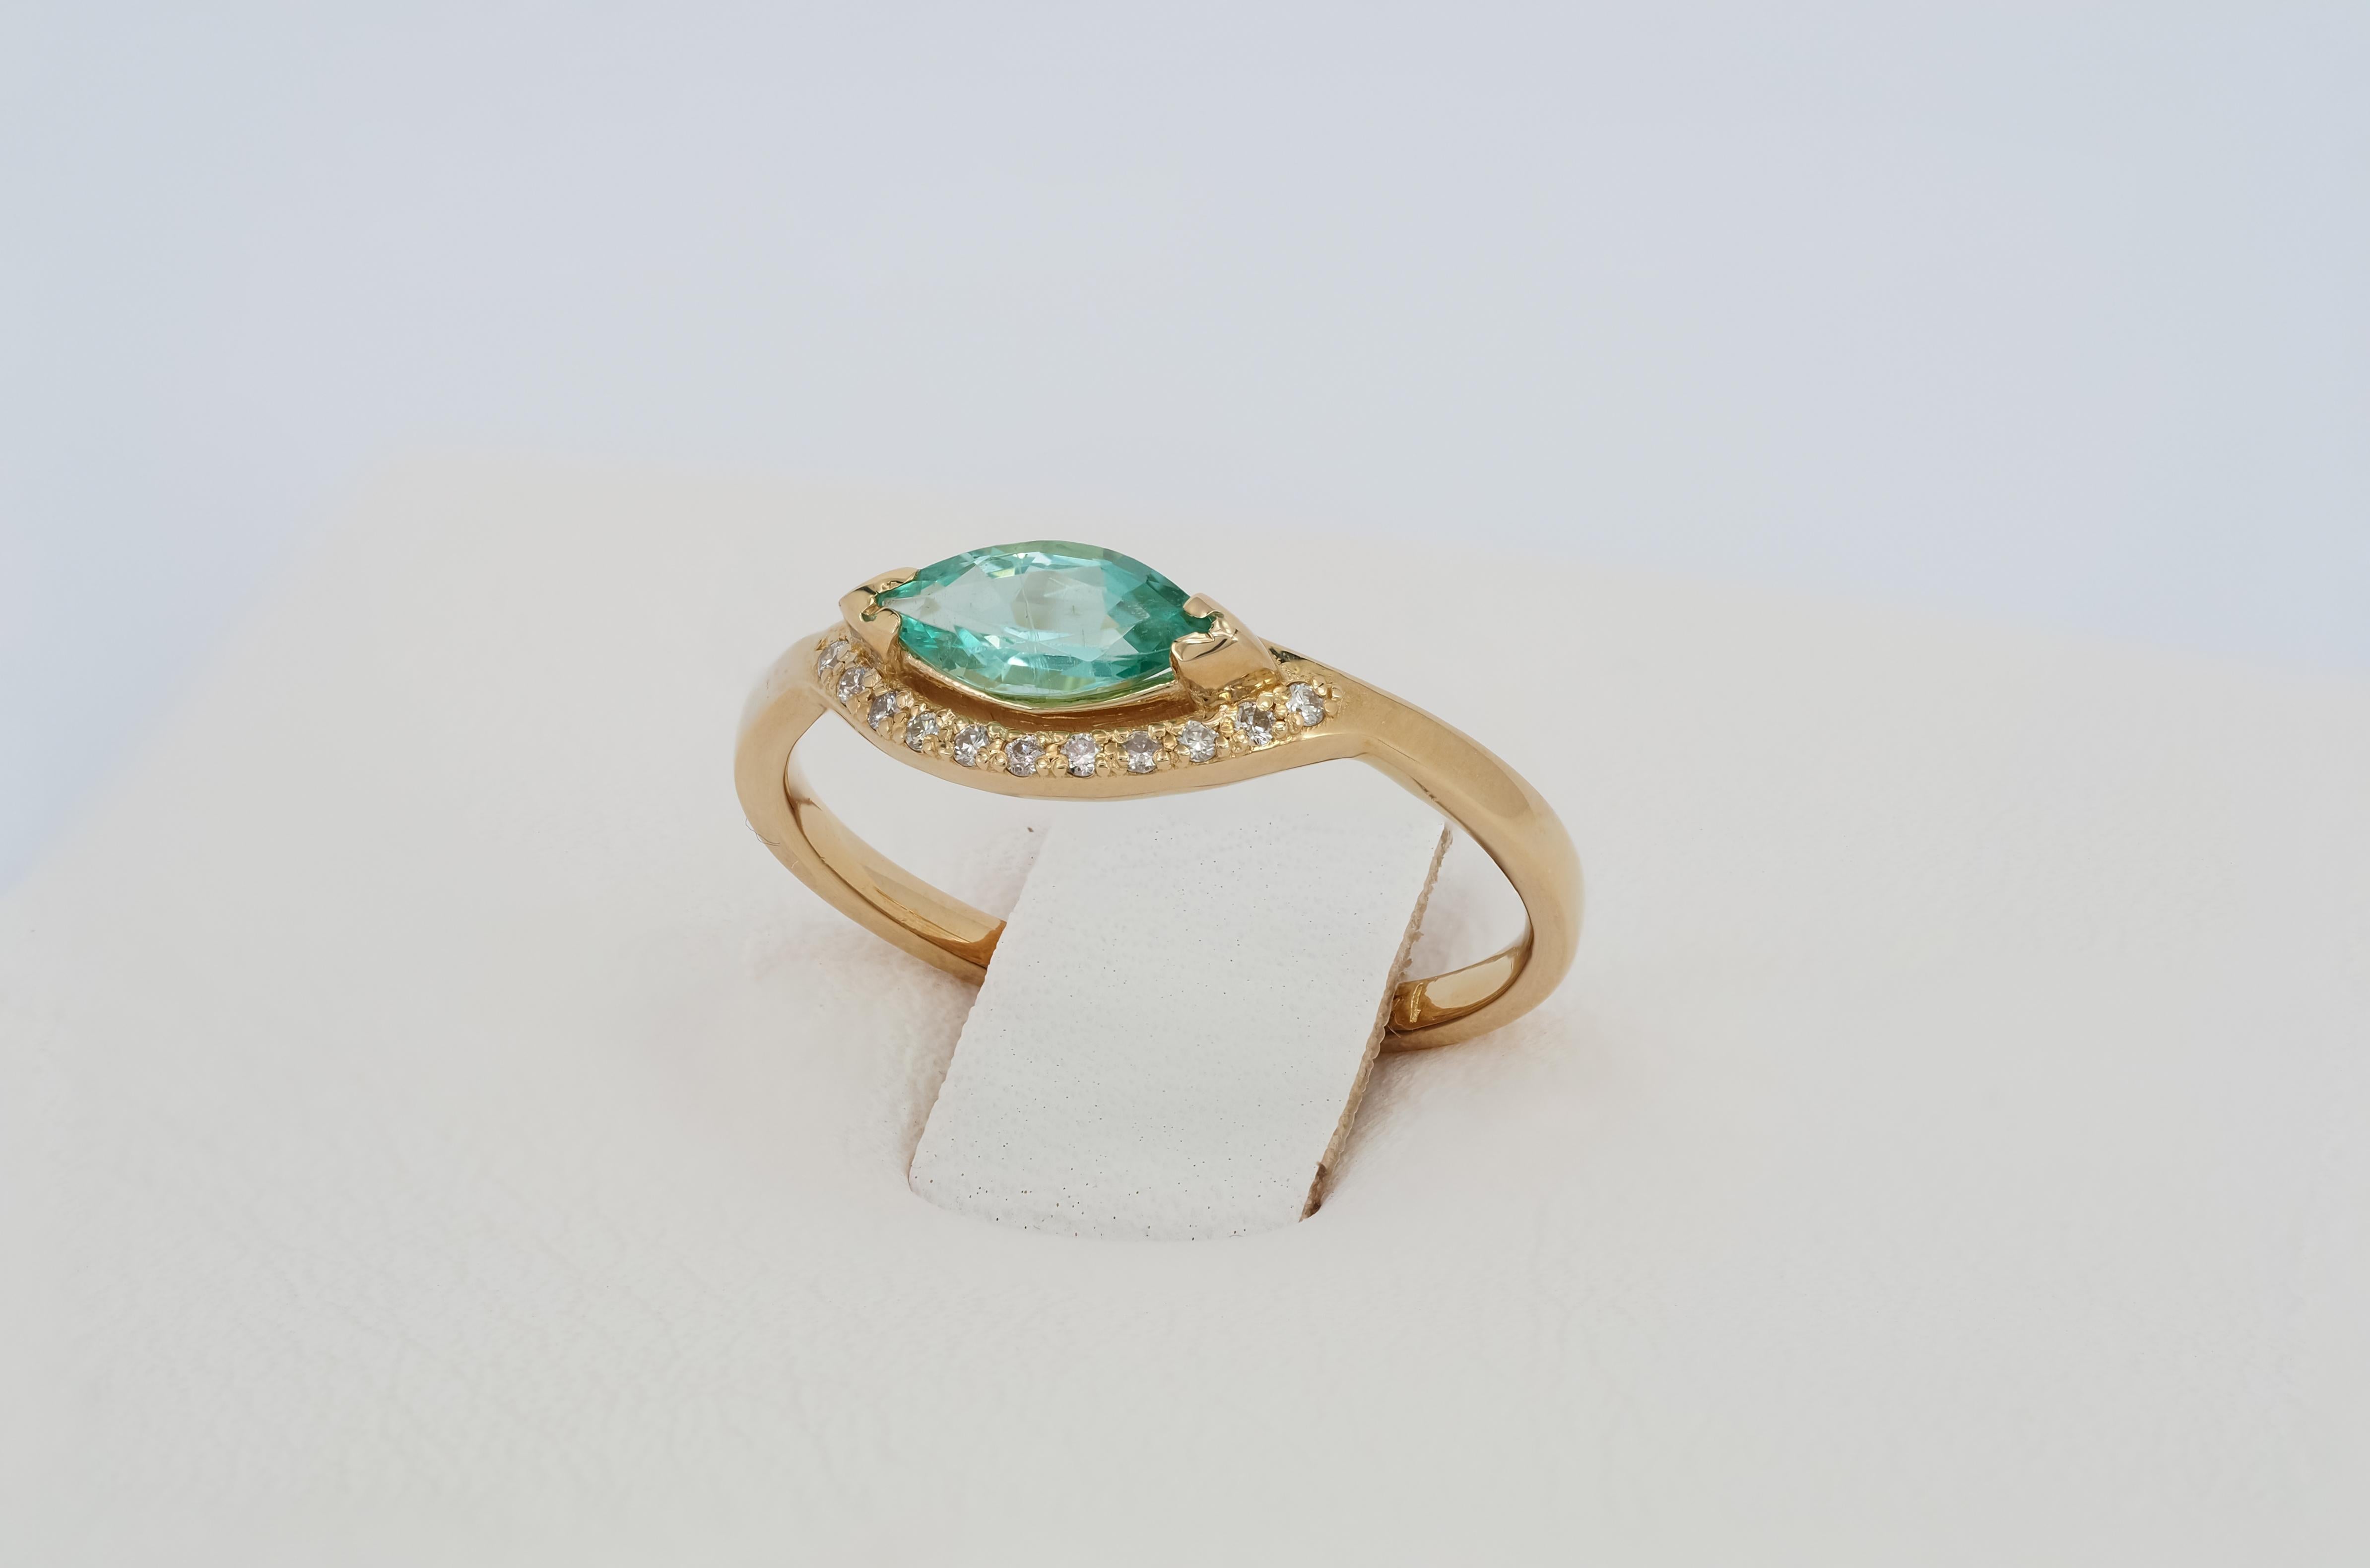 For Sale:  14 K Gold Ring with Marquise Cut Emerald and Diamonds 7